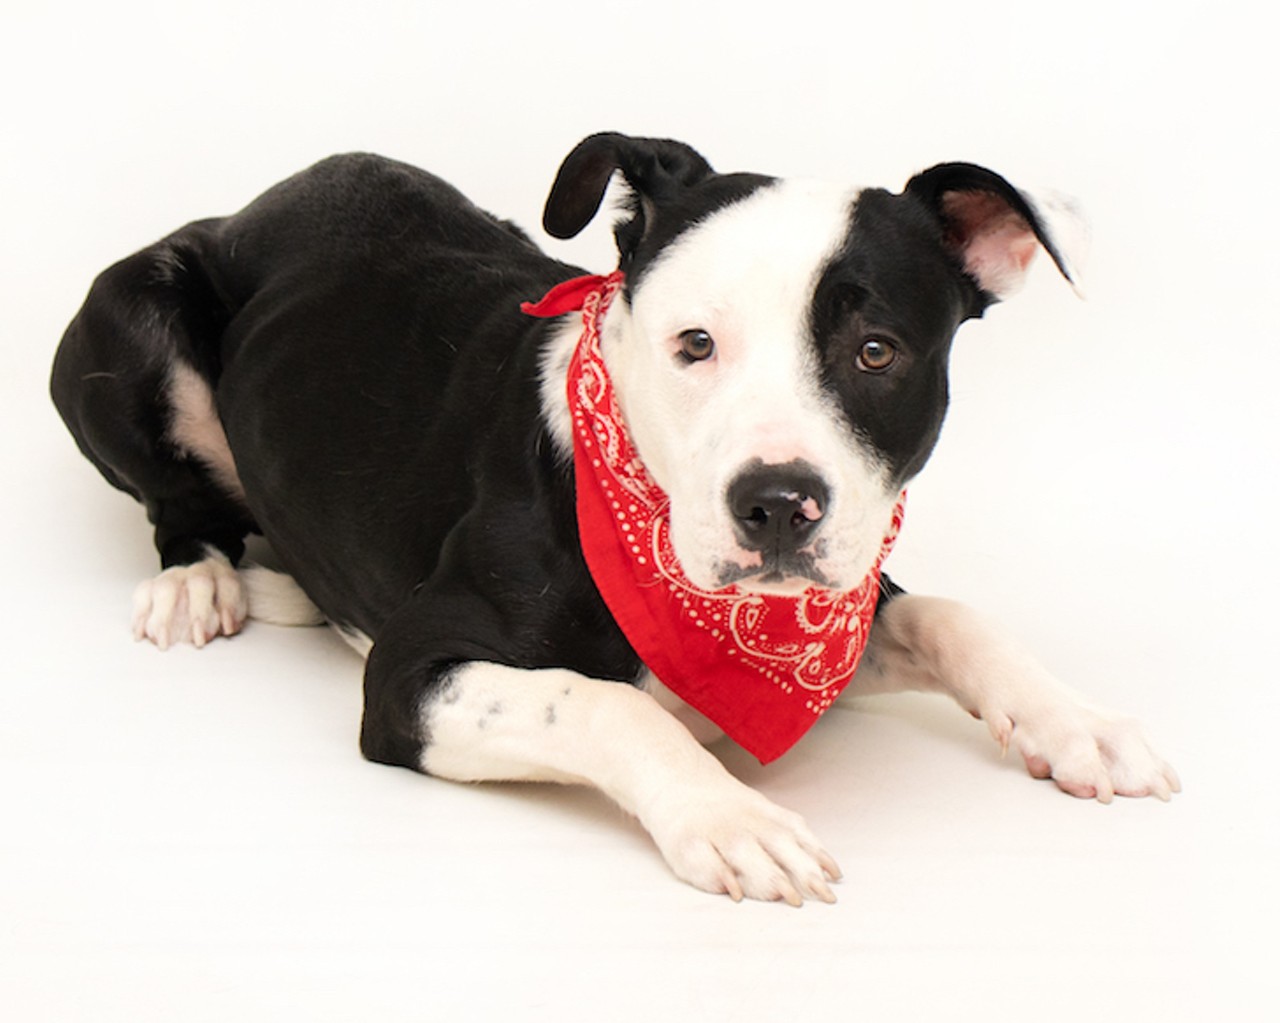 These tough little pups are just waiting to melt your heart at Orange County Animal Services